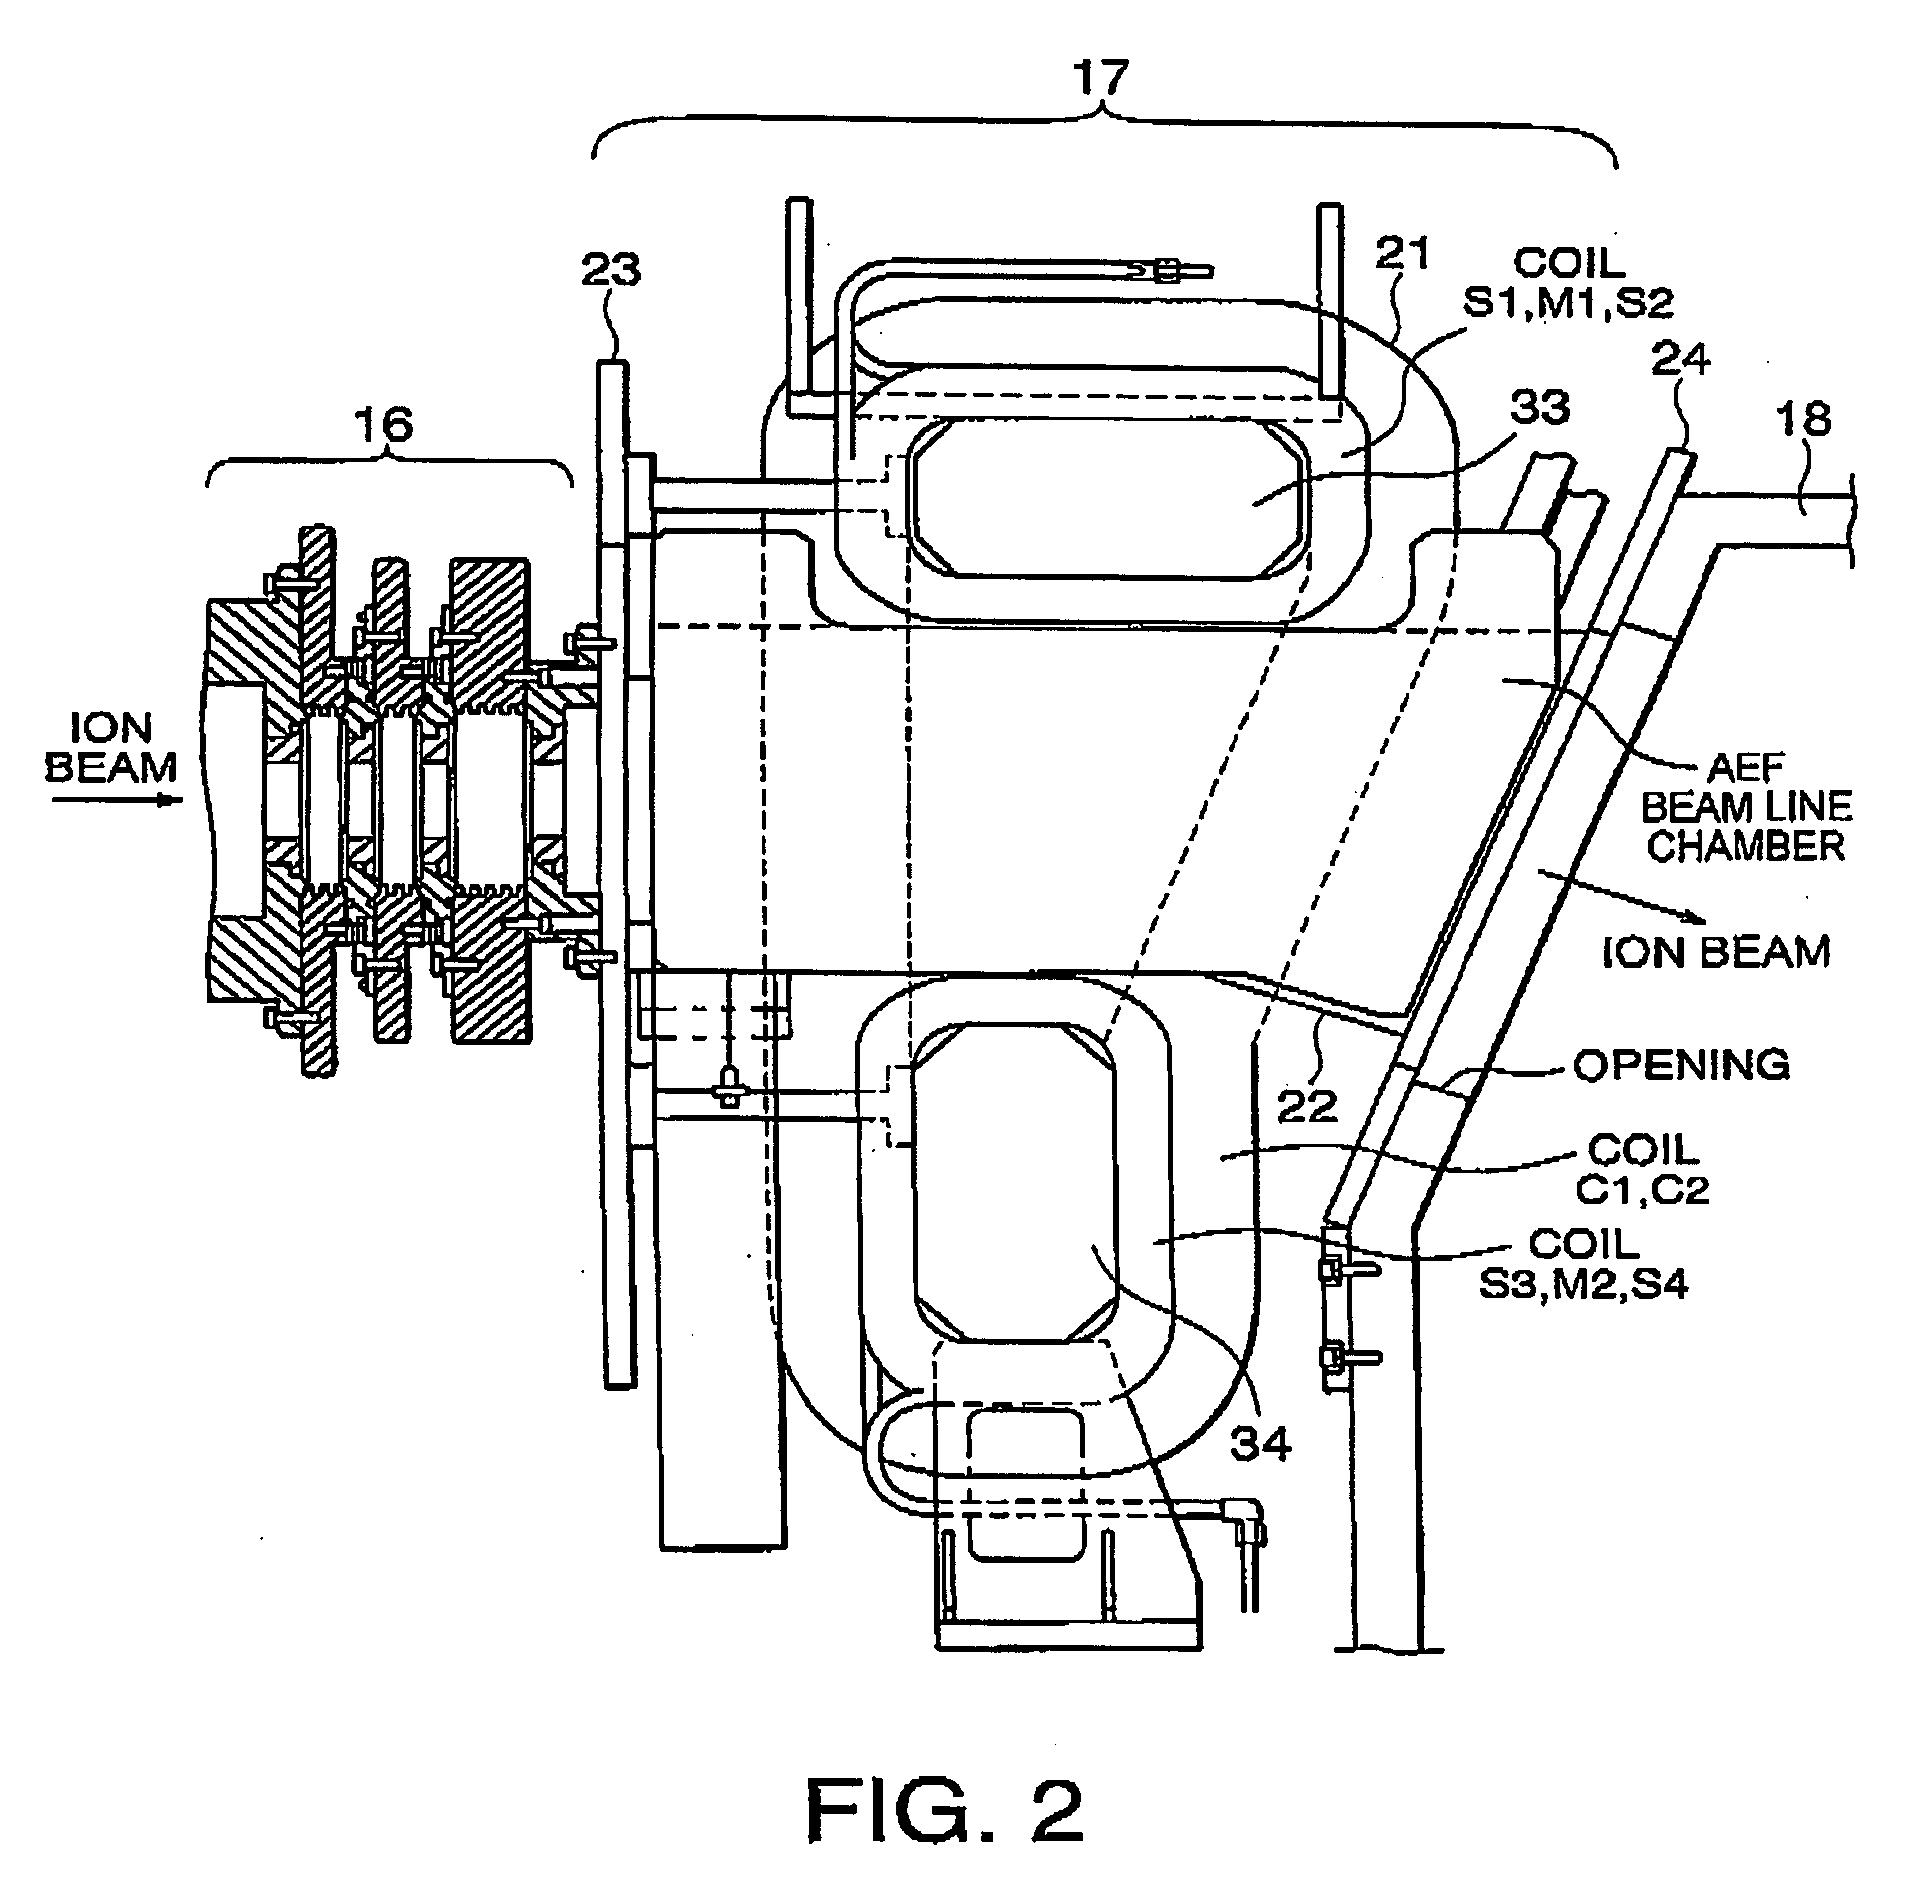 Irradiation system with ion beam/charged particle beam